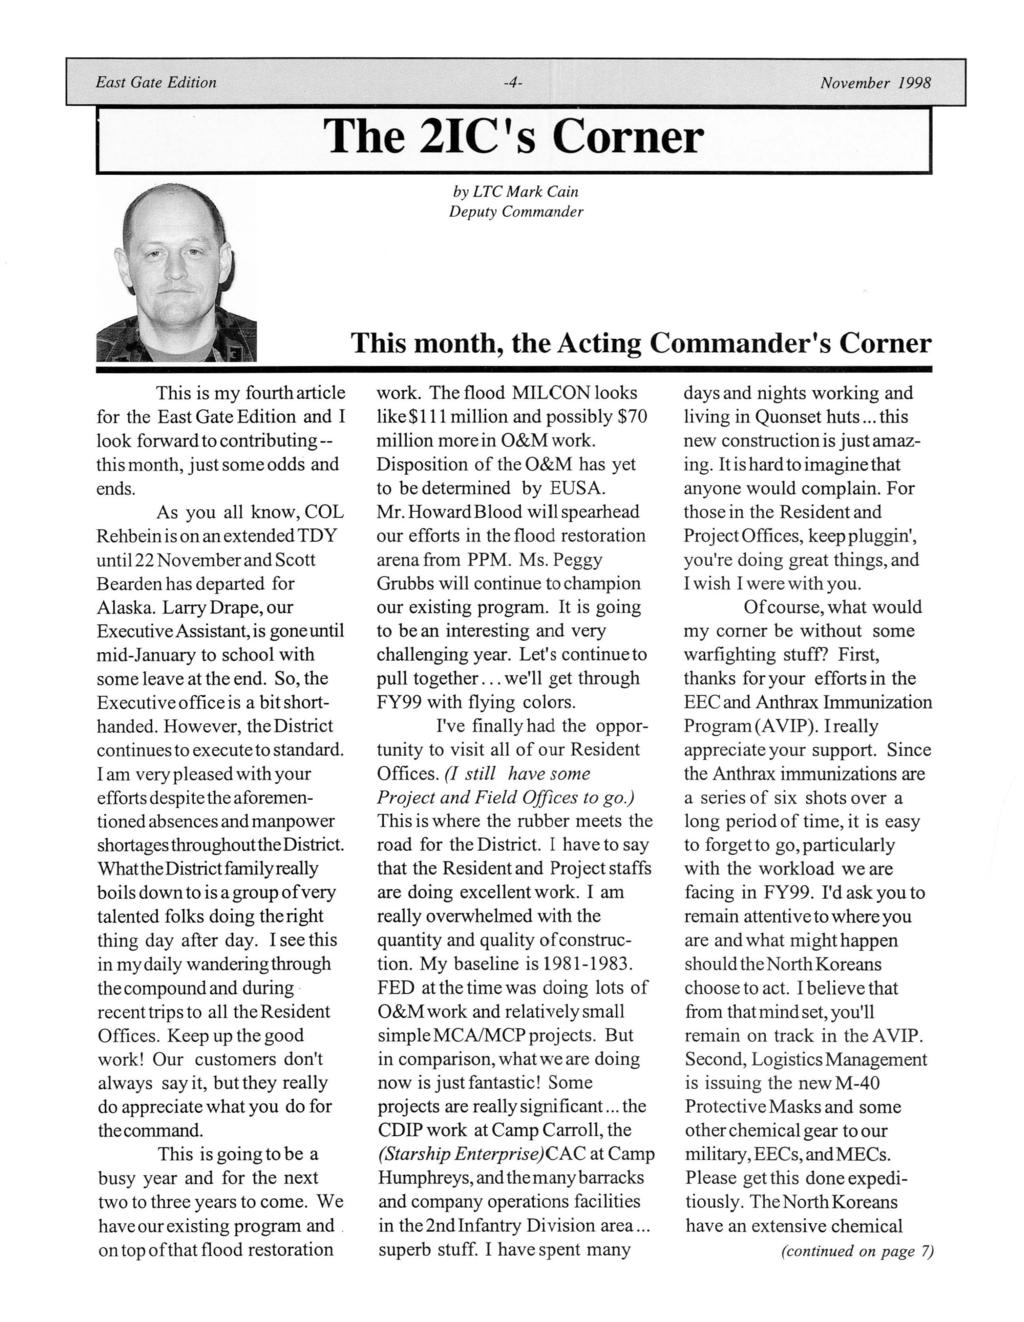 l East Gate Edition -4- November 1998 The 21C's Corner by LTC Mark Cain Deputy Commander This month, the Acting Commander's Corner This is my fourth article for the East Gate Edition and I look